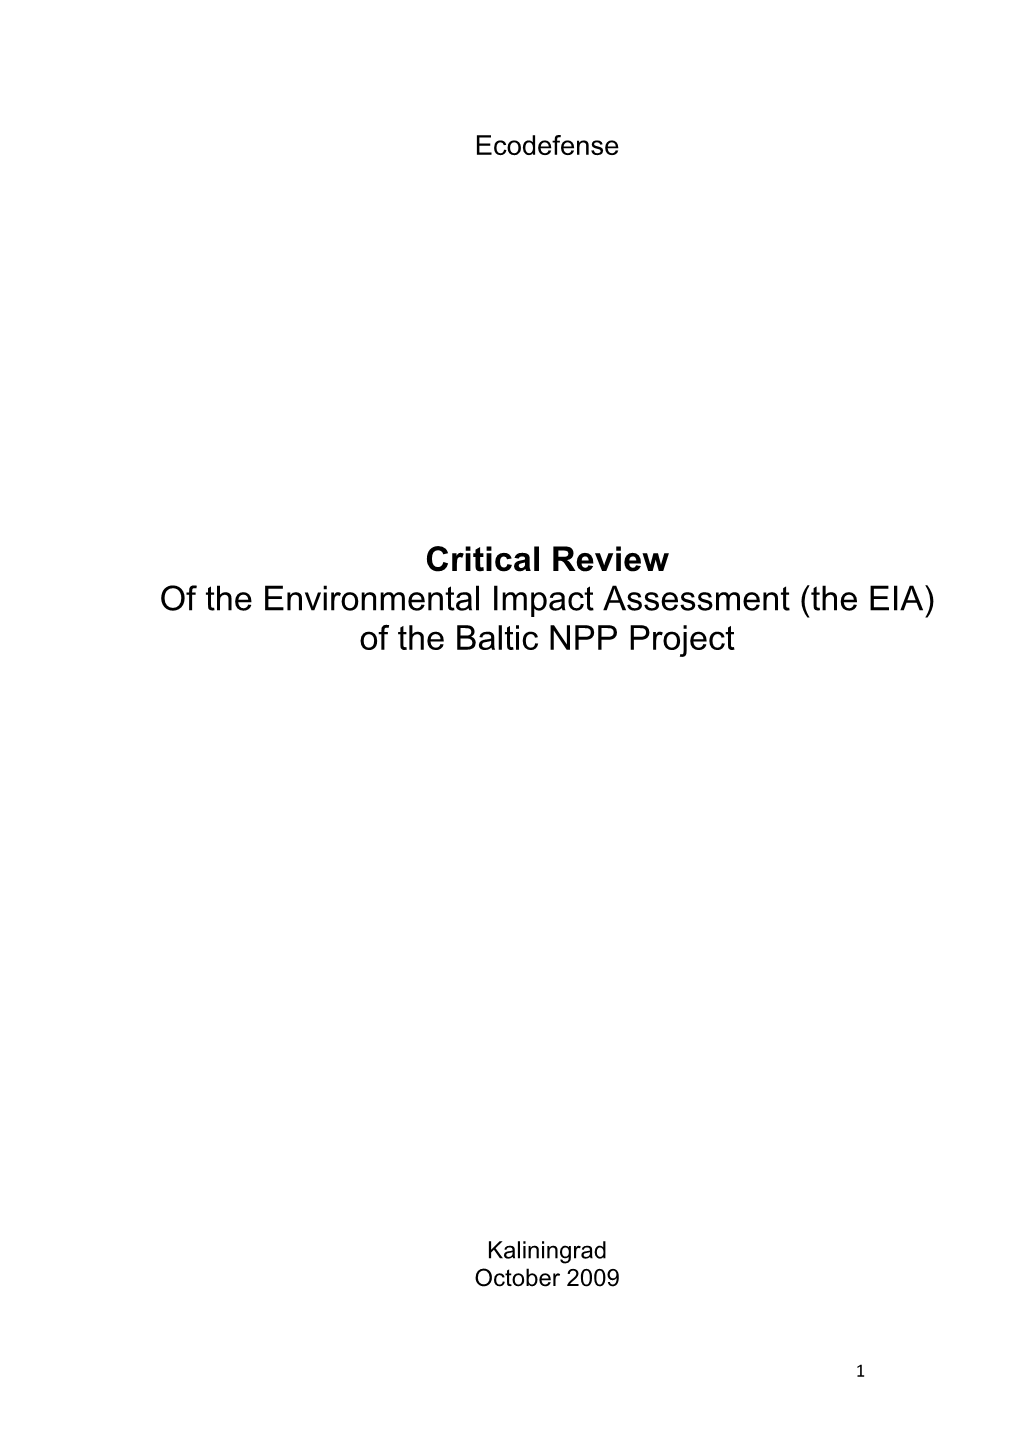 Critical Review of the Environmental Impact Assessment (The EIA) of the Baltic NPP Project